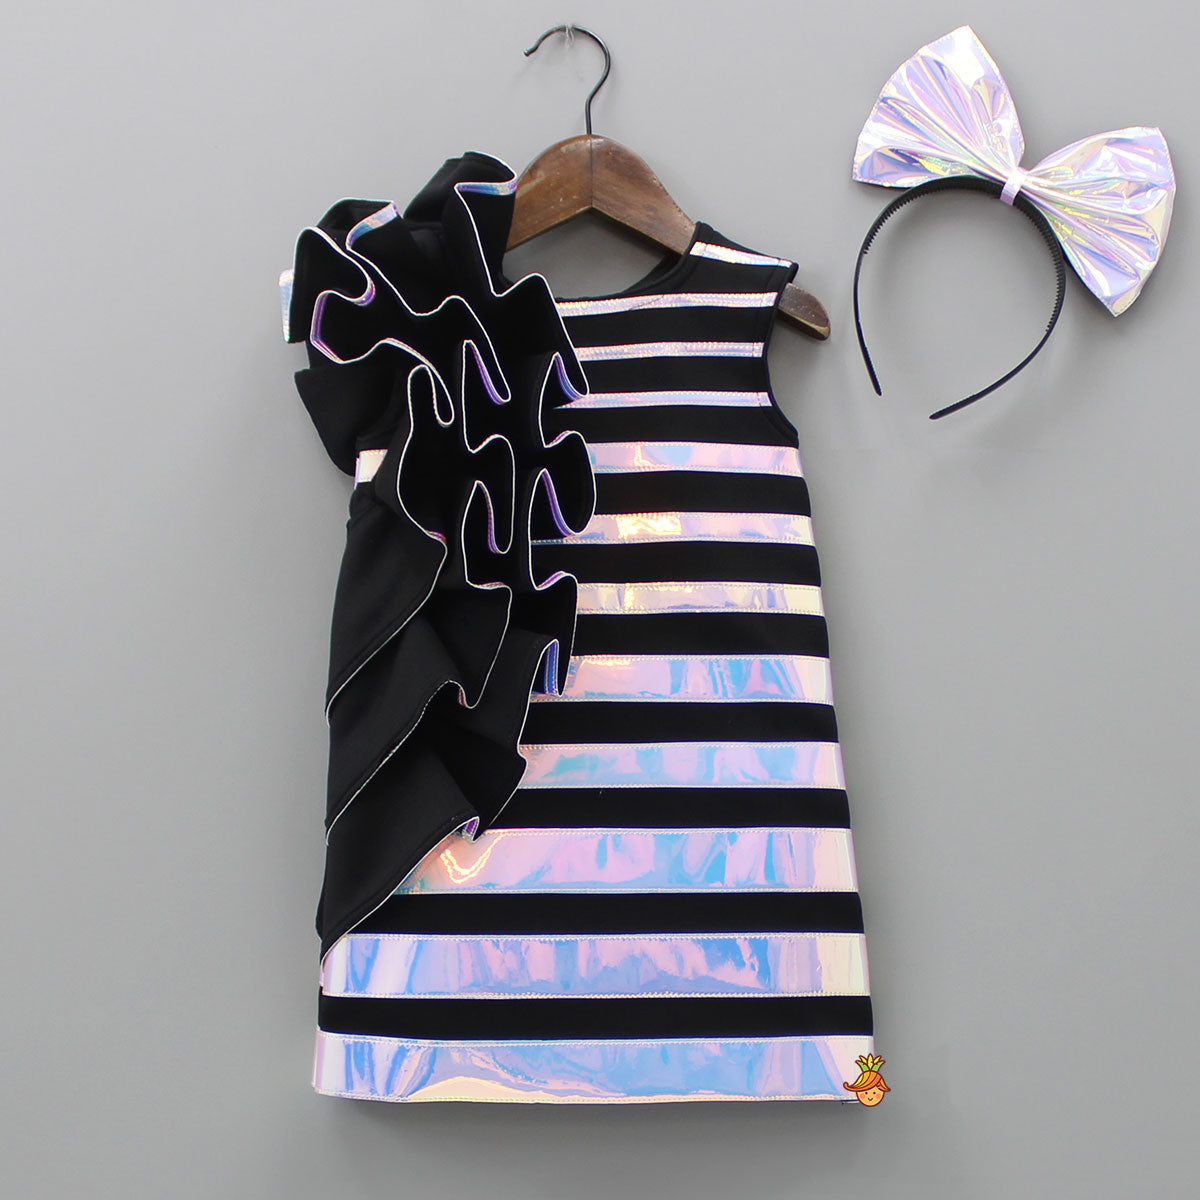 Black Holographic Ruffle Dress With Bow Hair band